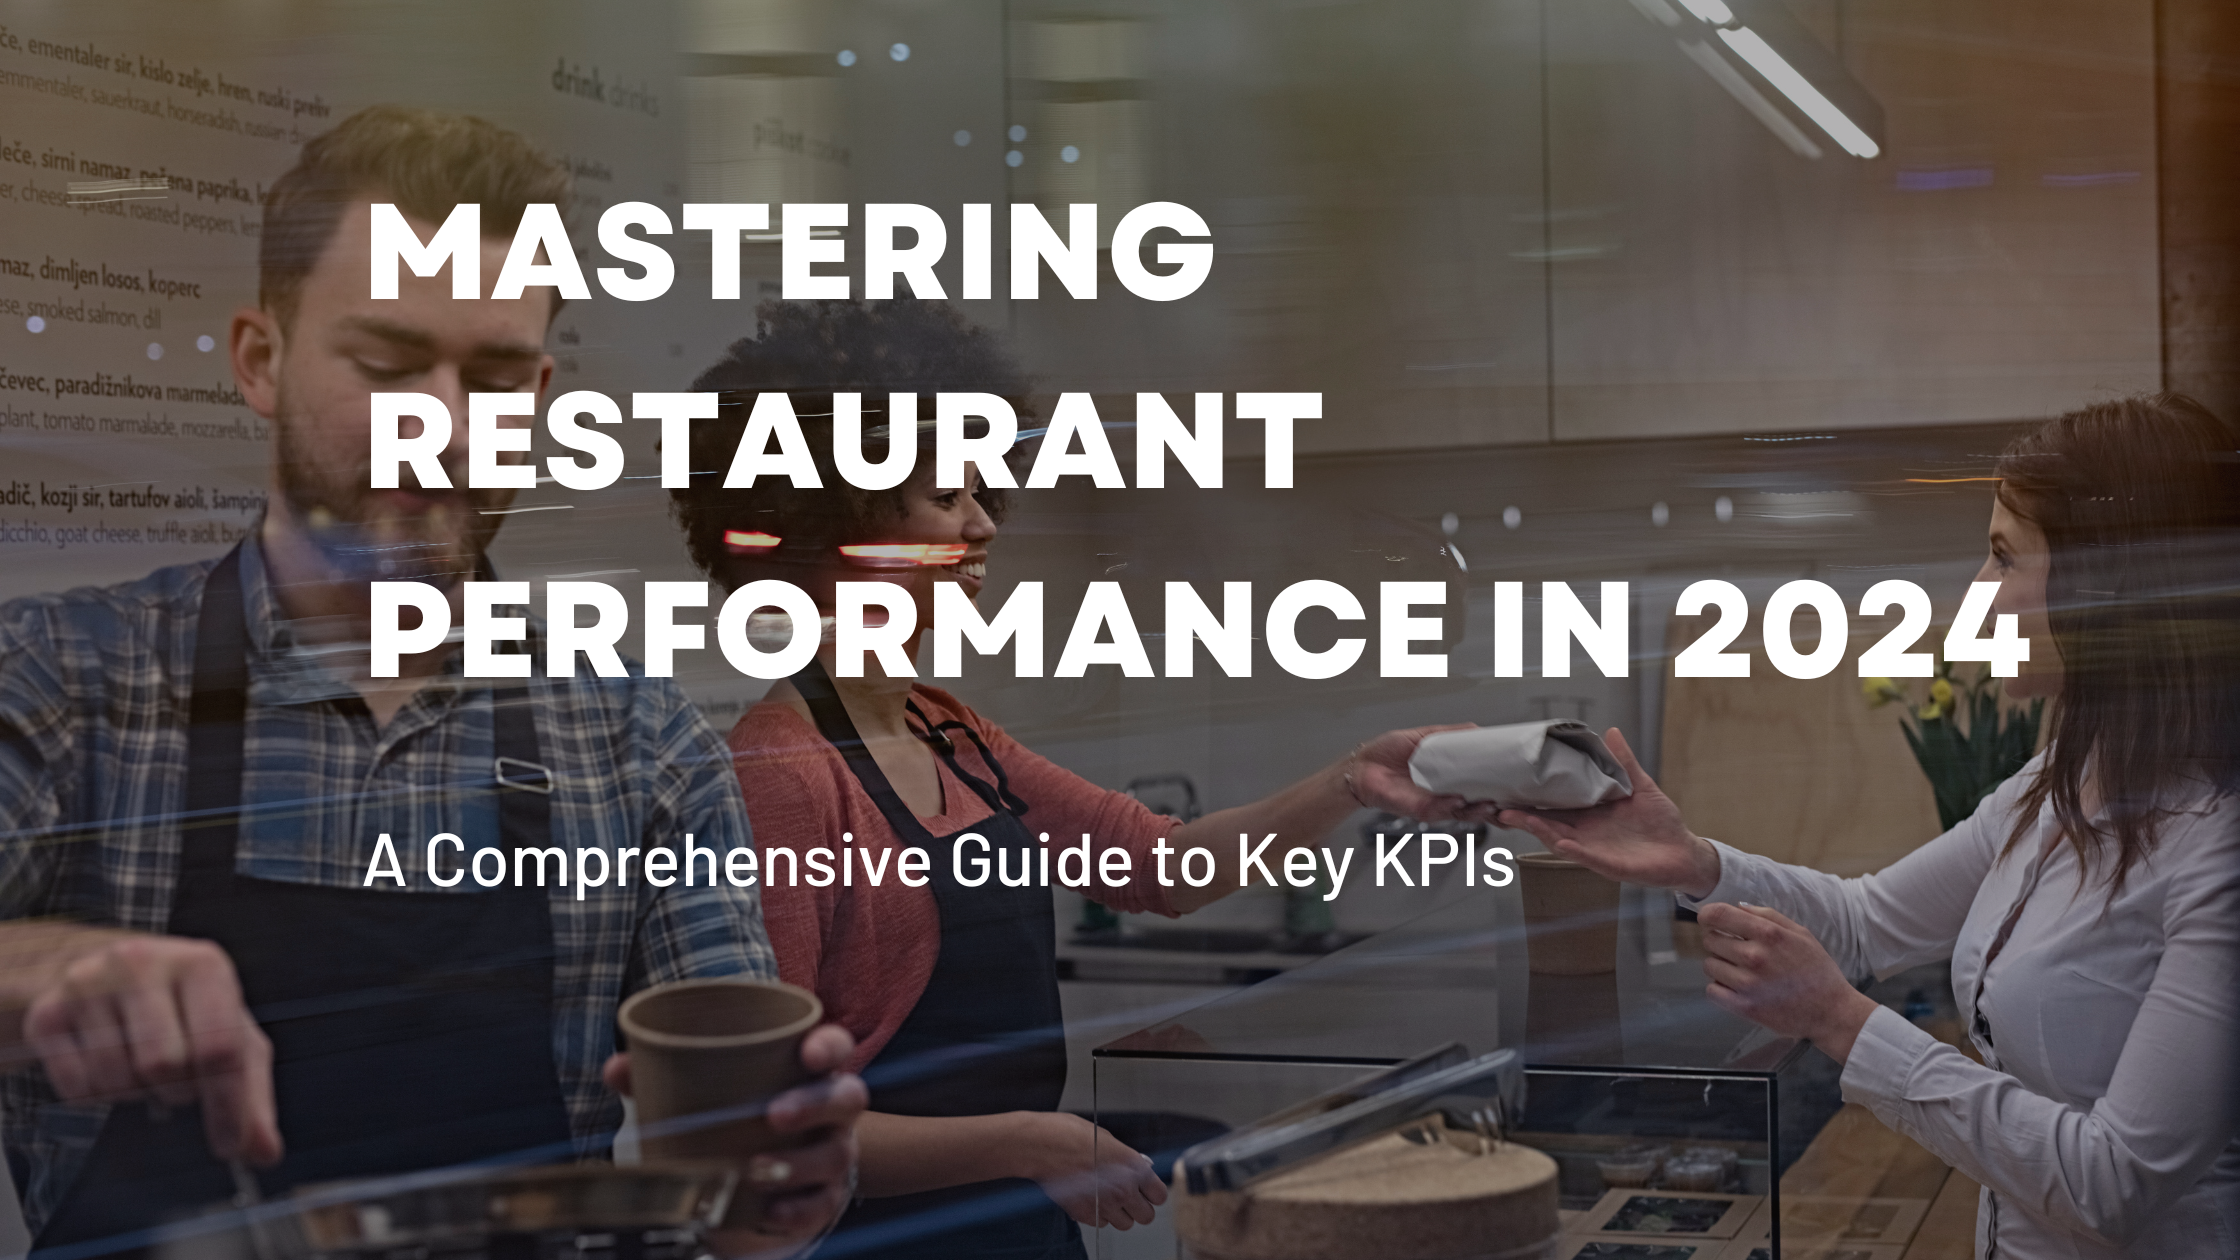 Mastering Restaurant Performance in 2024: A Comprehensive Guide to Key KPIs